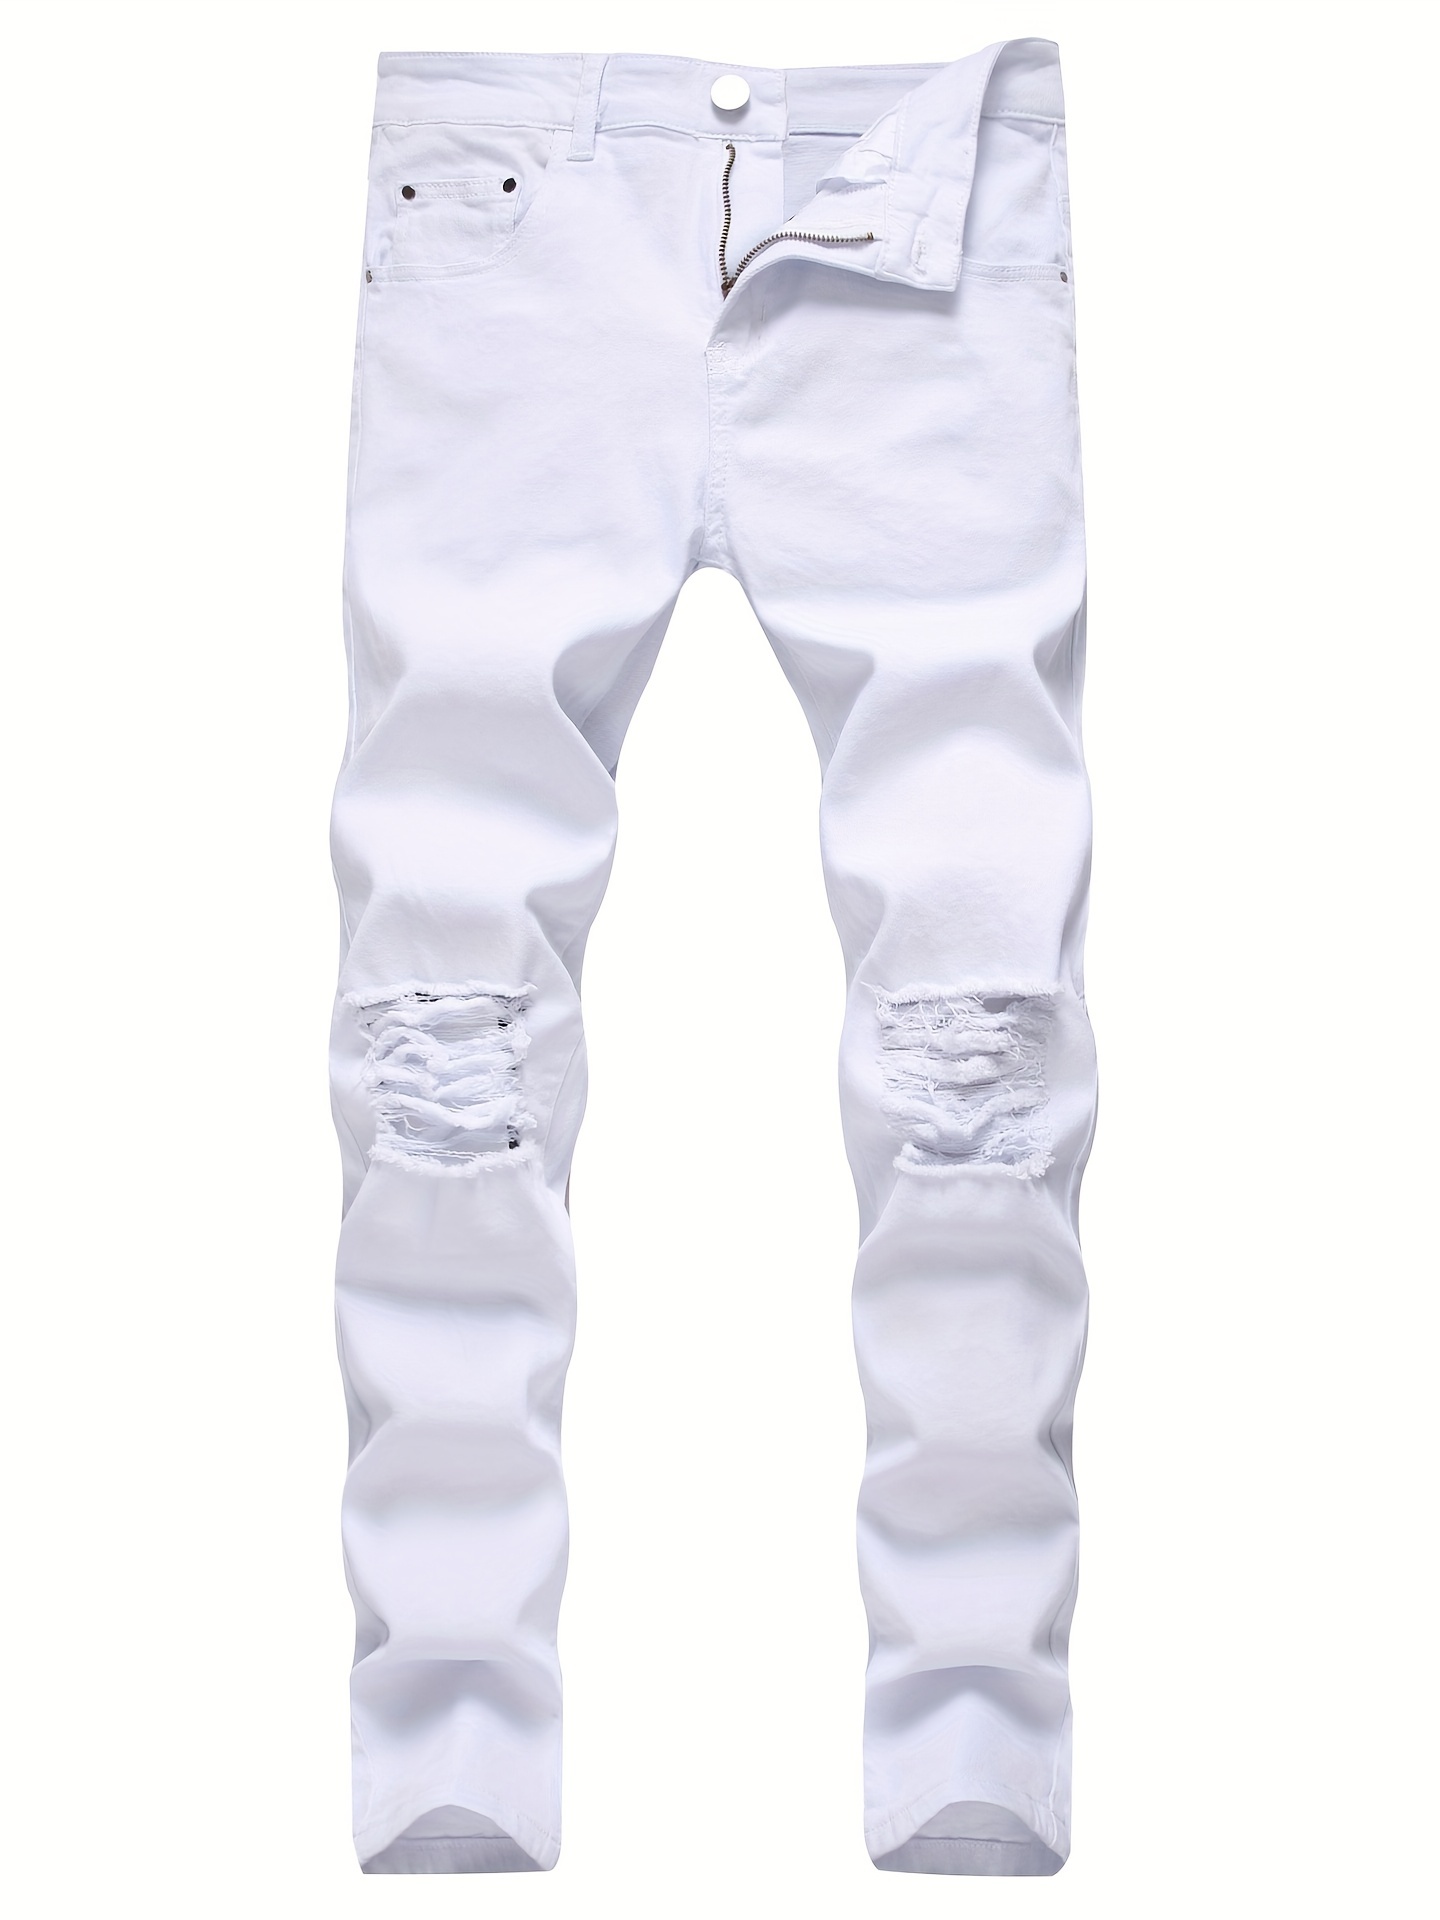 Buy White Jeans for Men by Pepe Jeans Online  Ajiocom